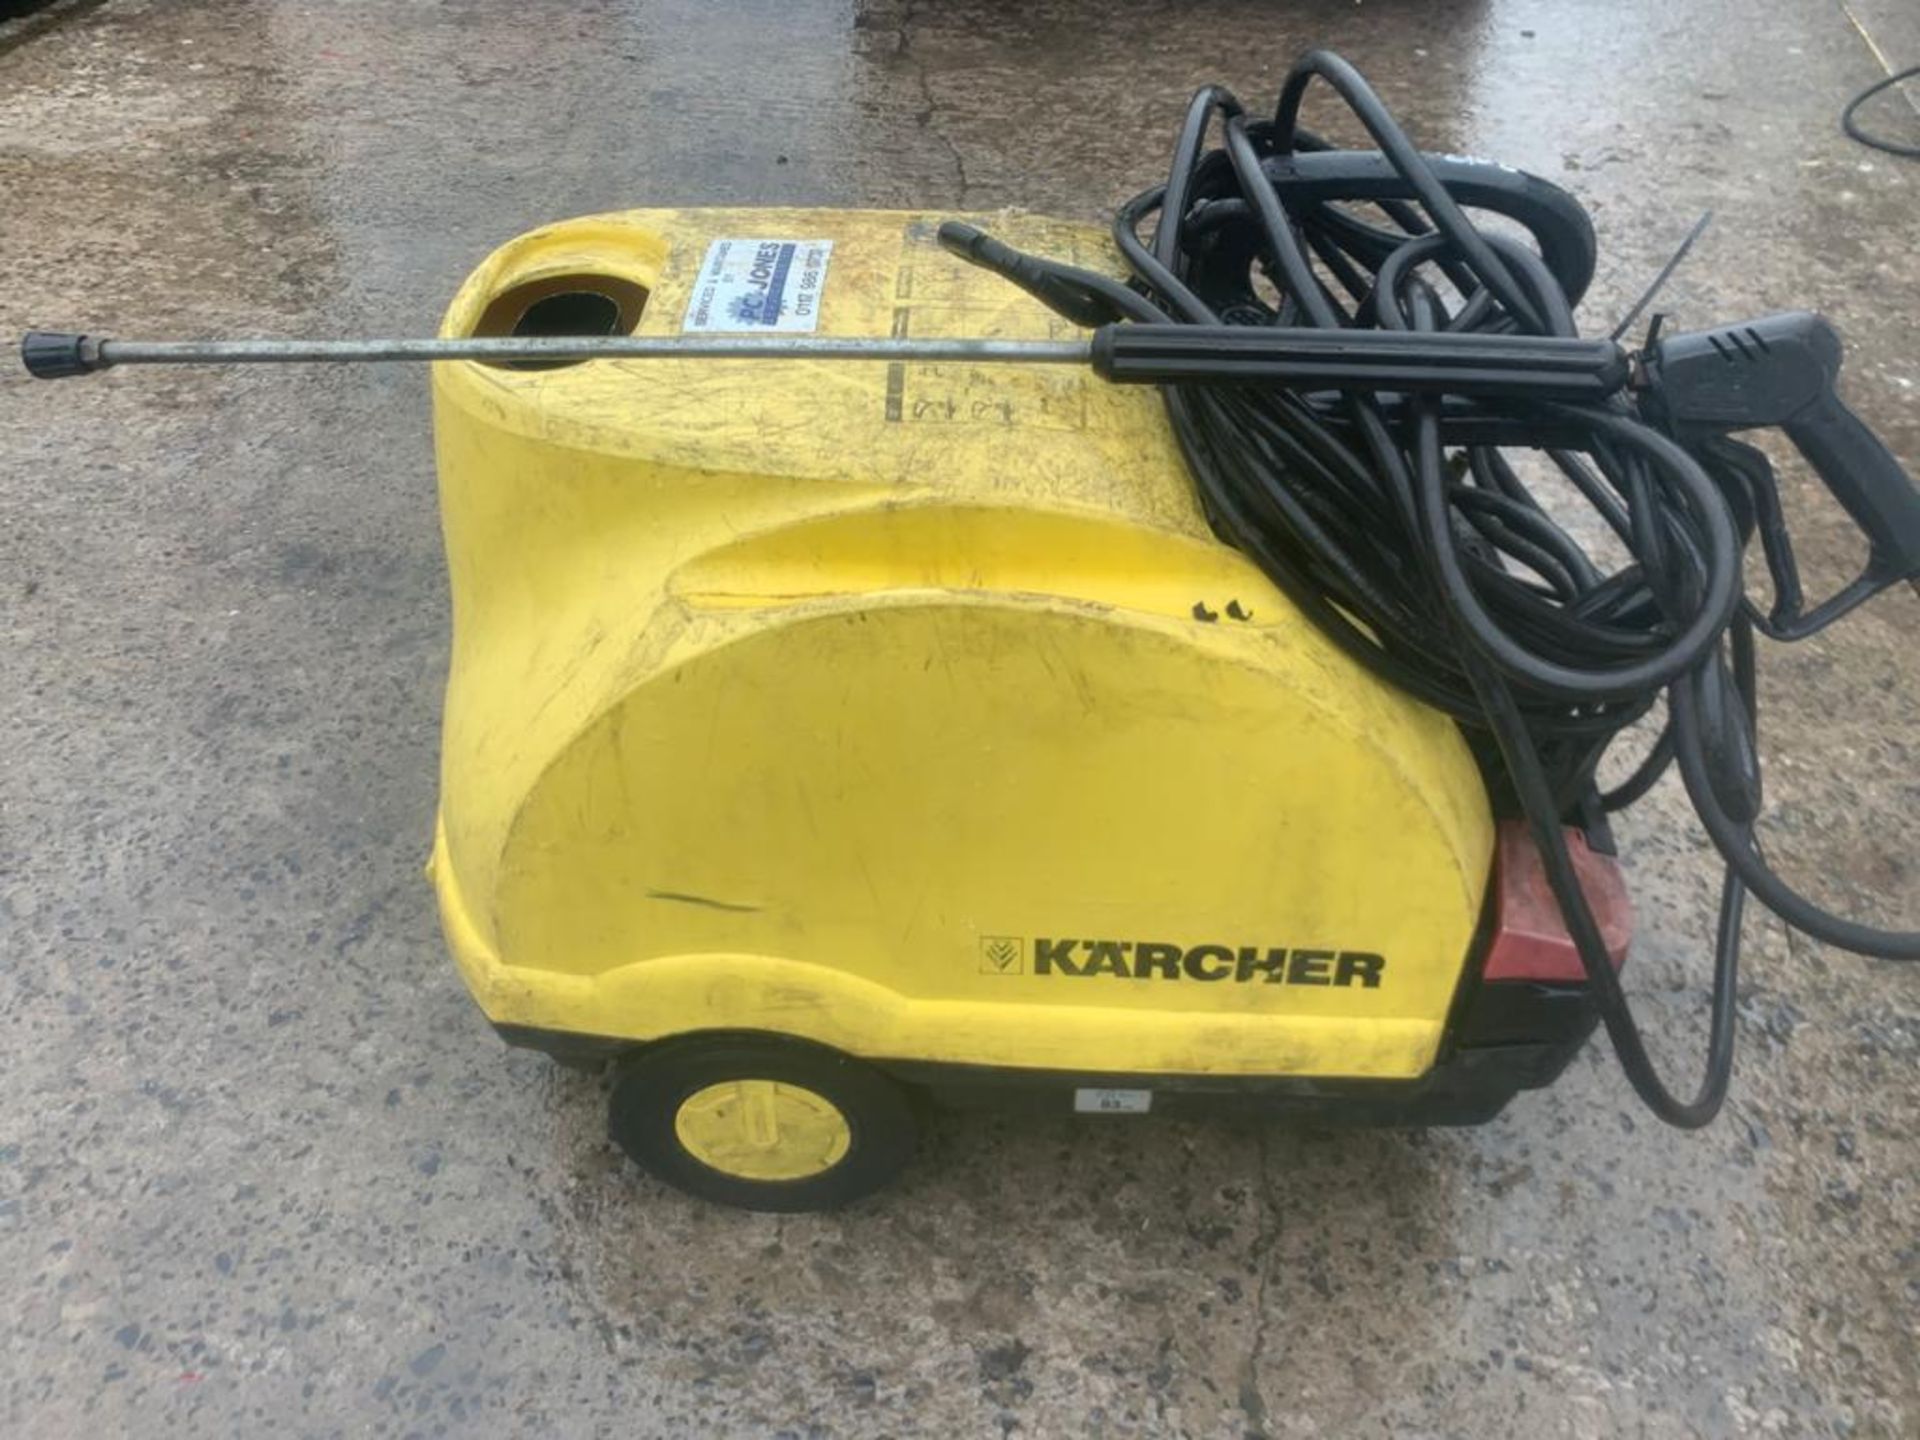 Karcher Diesel Hot and Cold Power Washer